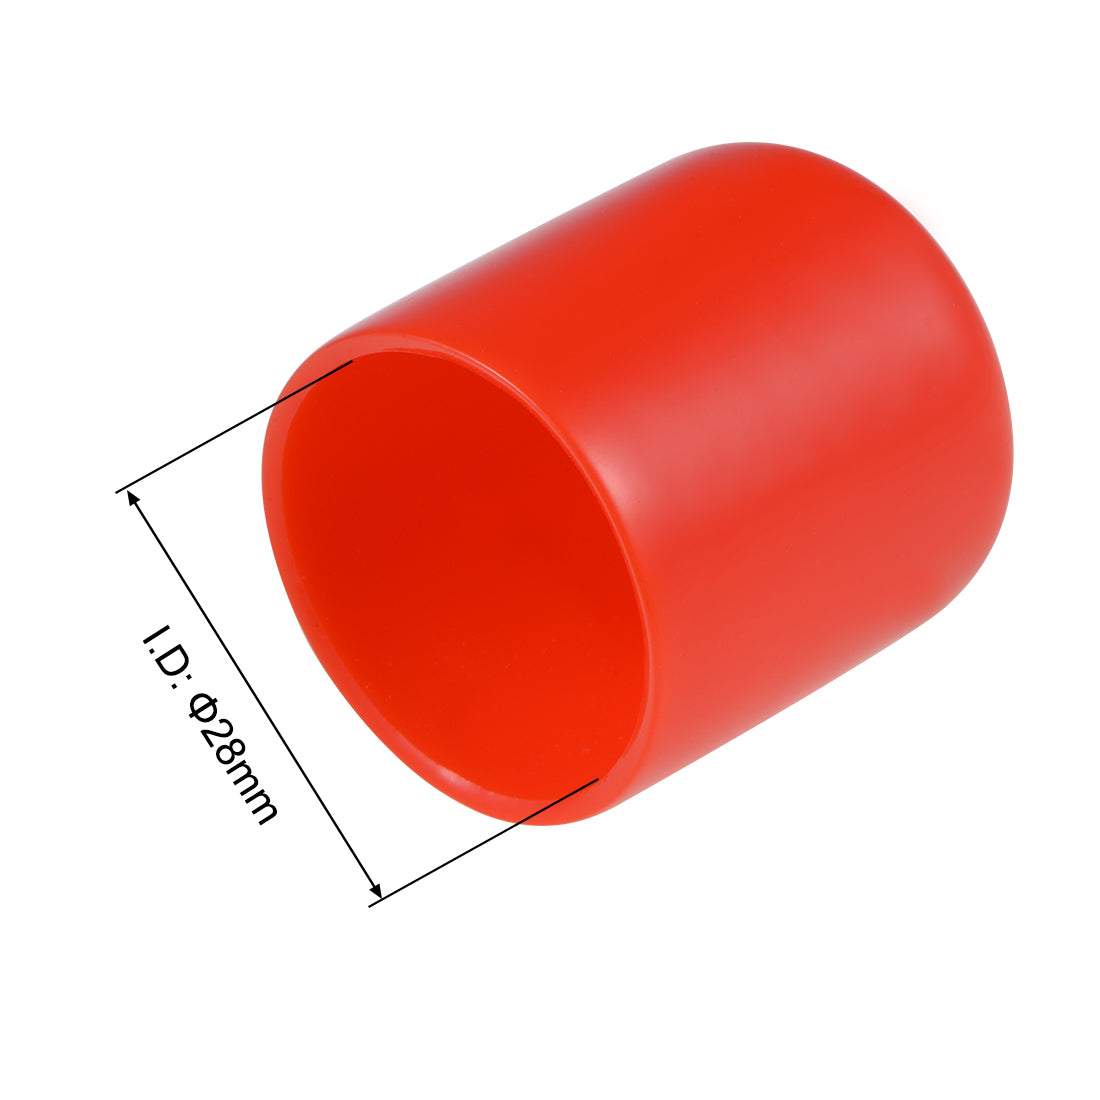 uxcell Uxcell Screw Thread Protector, 28mm ID Round End Cap Cover Red Tube Caps 5pcs